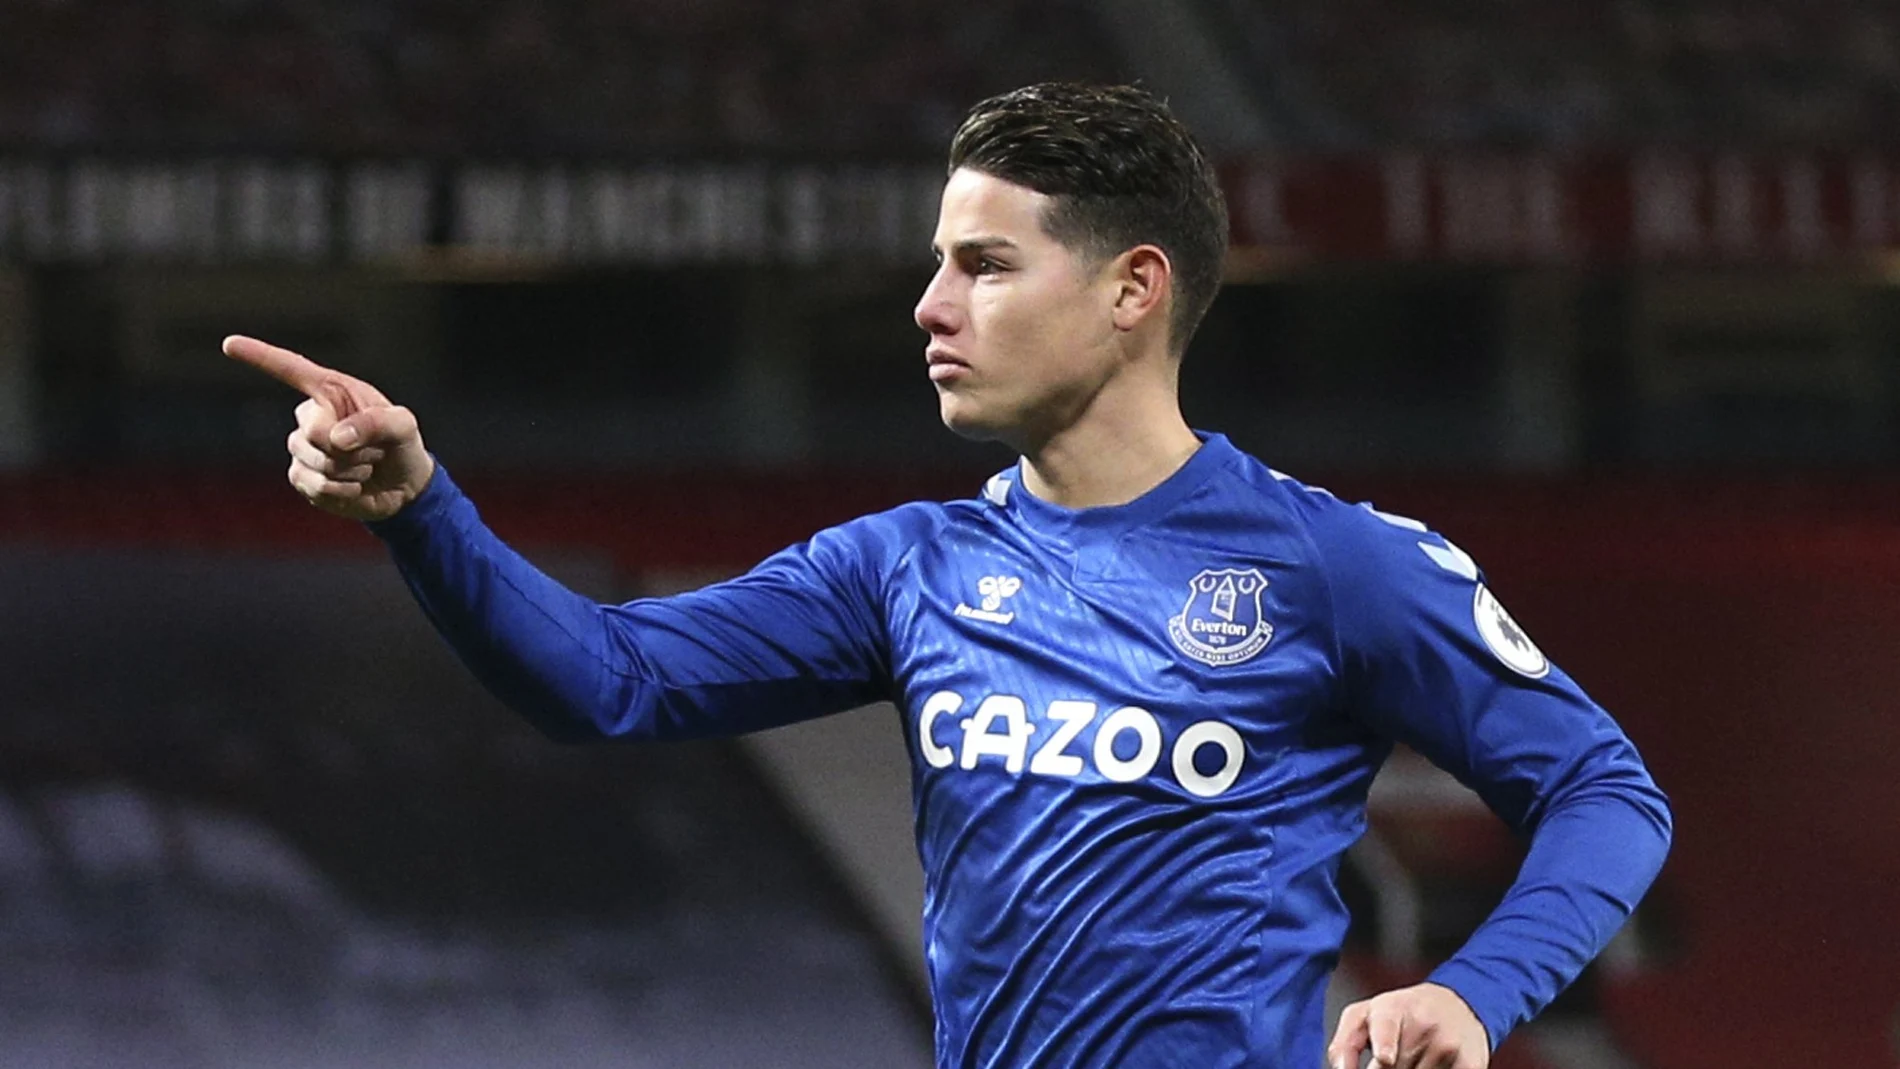 Everton's James Rodriguez celebrates after scoring his side's second goal during an English Premier League soccer match between Manchester United and Everton at the Old Trafford stadium in Manchester, England, Saturday Feb. 6, 2021. (Alex Pantling/Pool via AP)